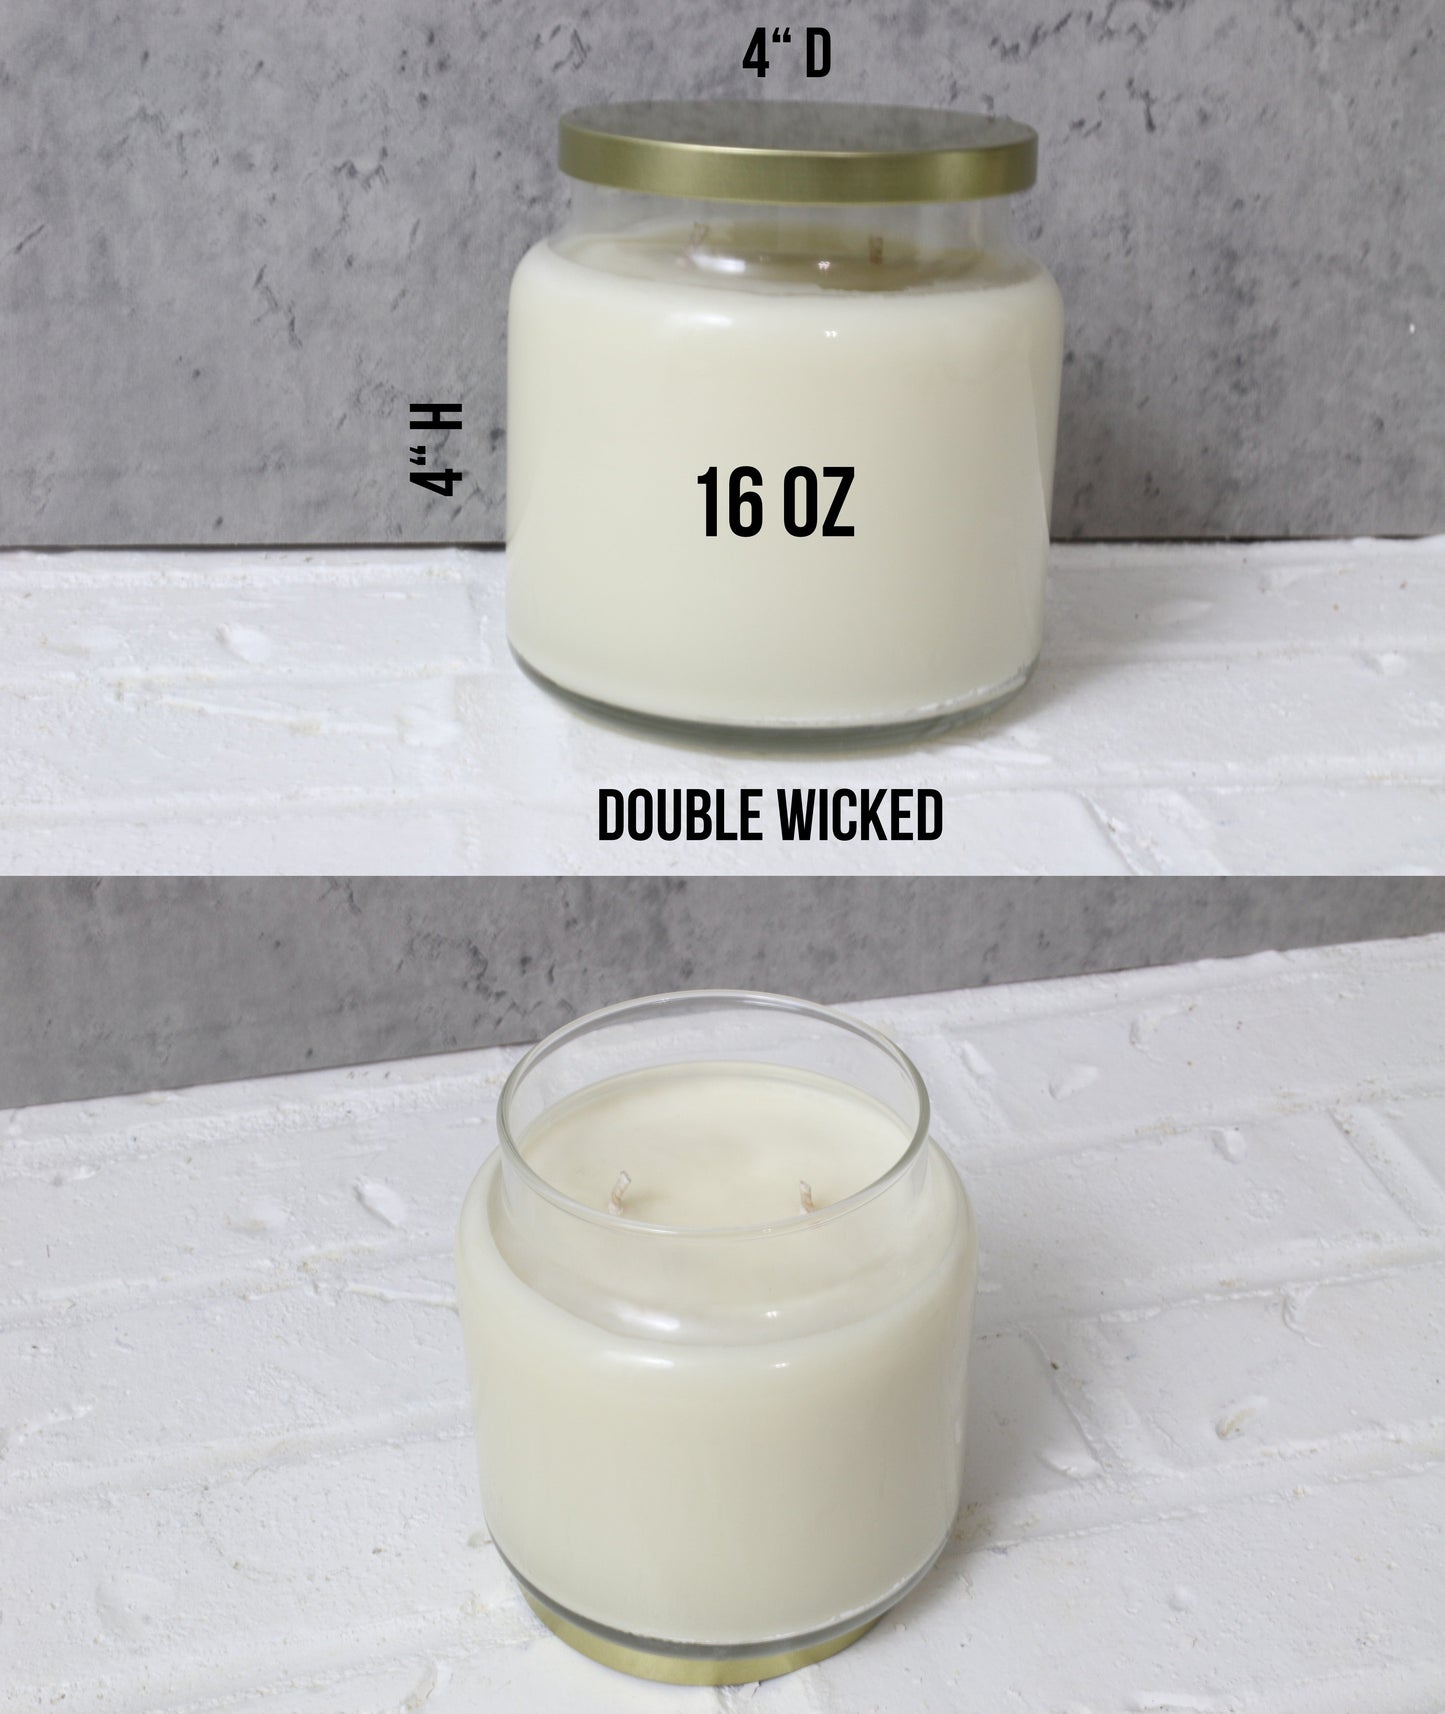 Look At You Turning 30 and Shit Soy Candle - Choose Your Scent - Birthday Gift